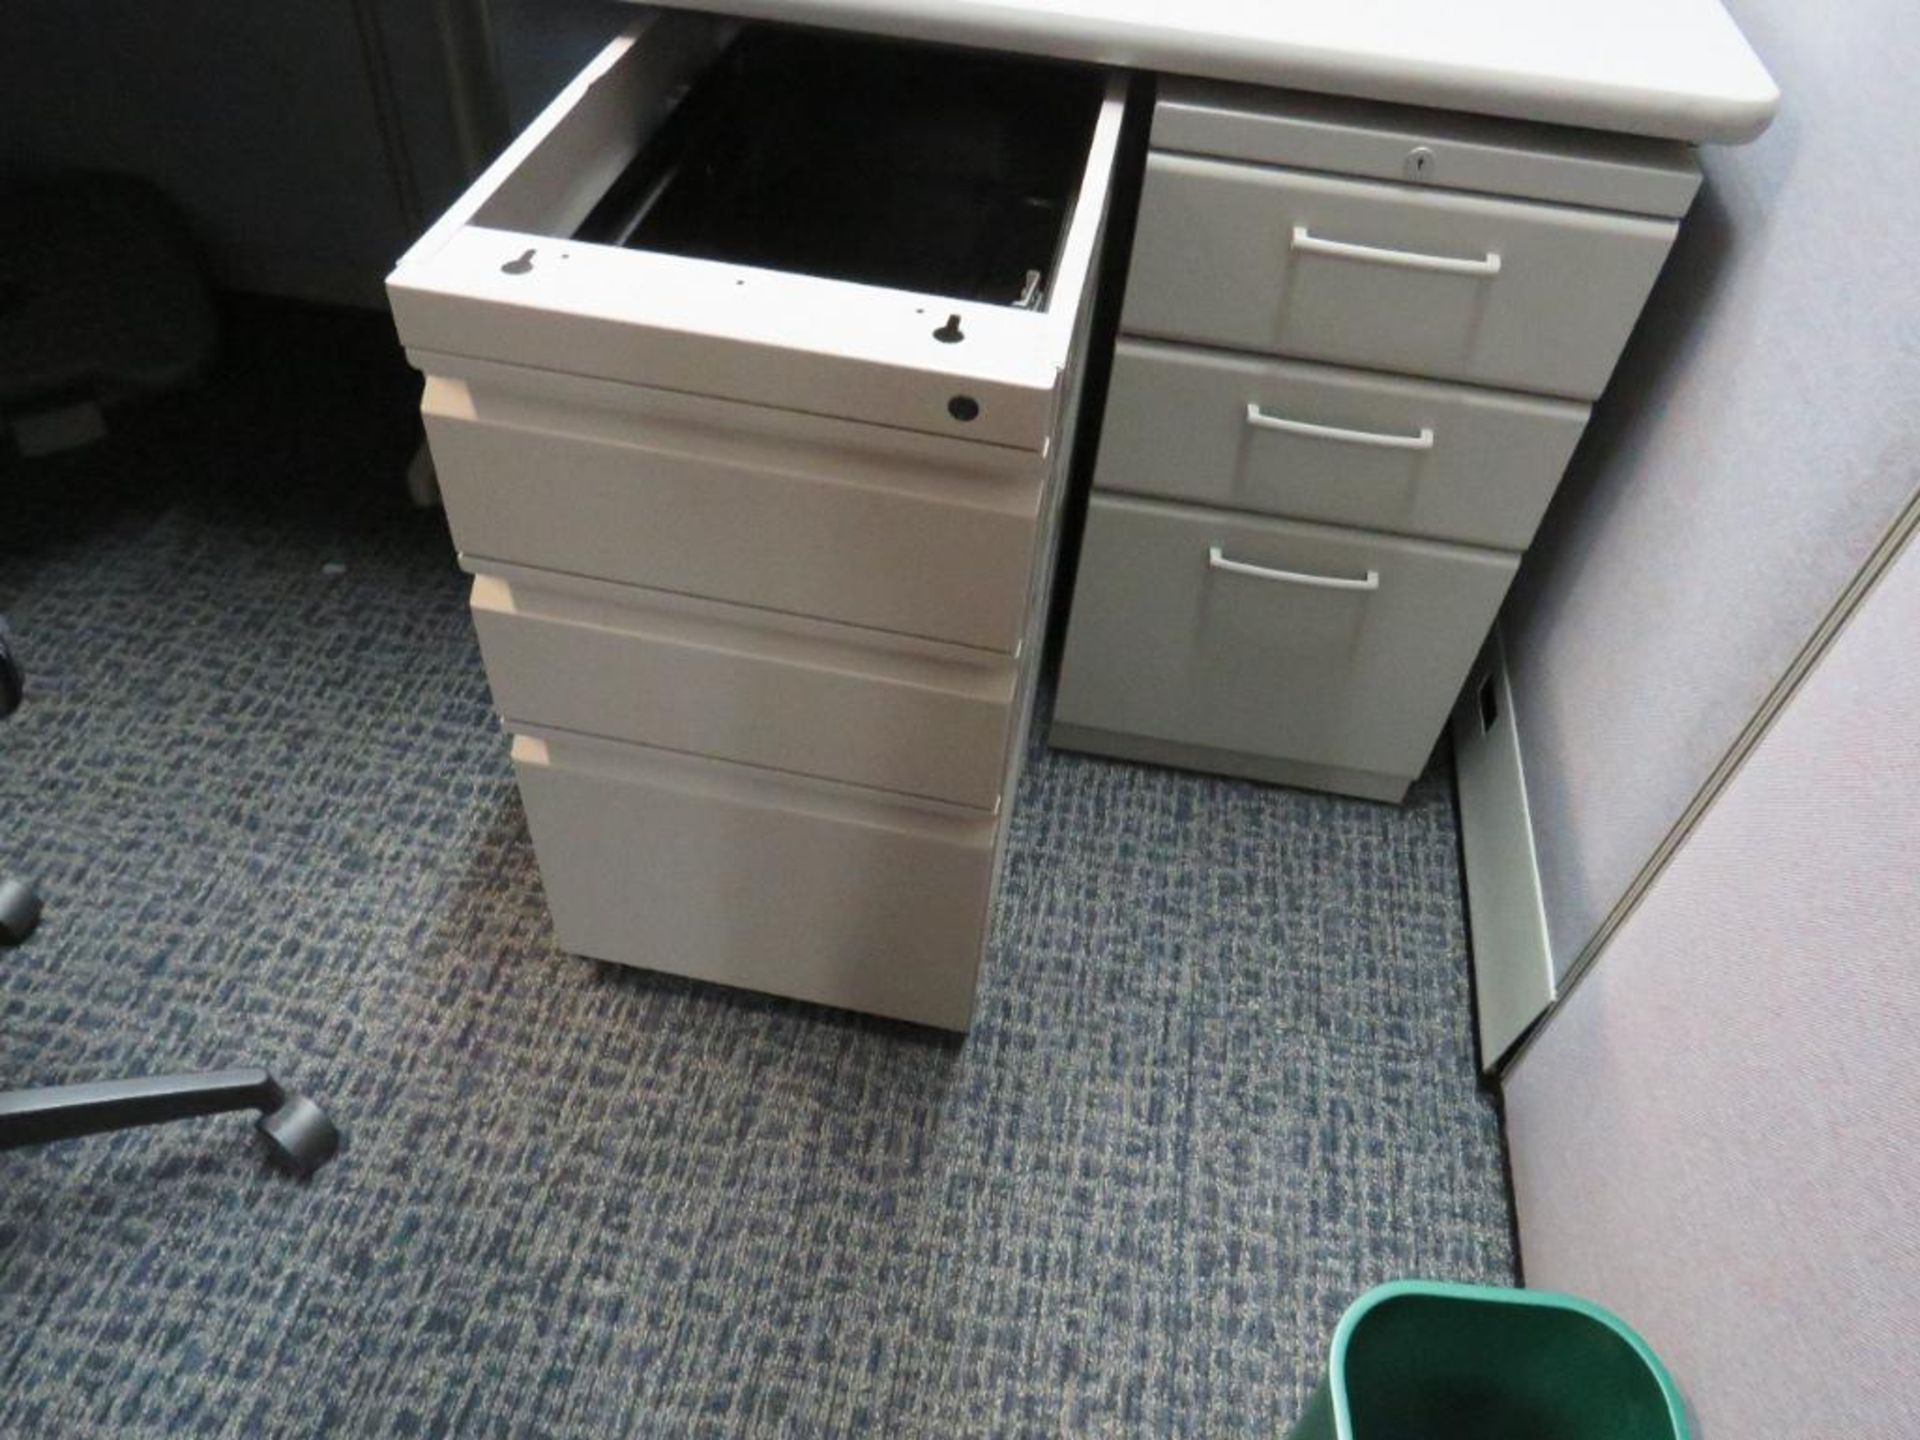 Lot c/o: Approx (360) File Cabinets-Assorted